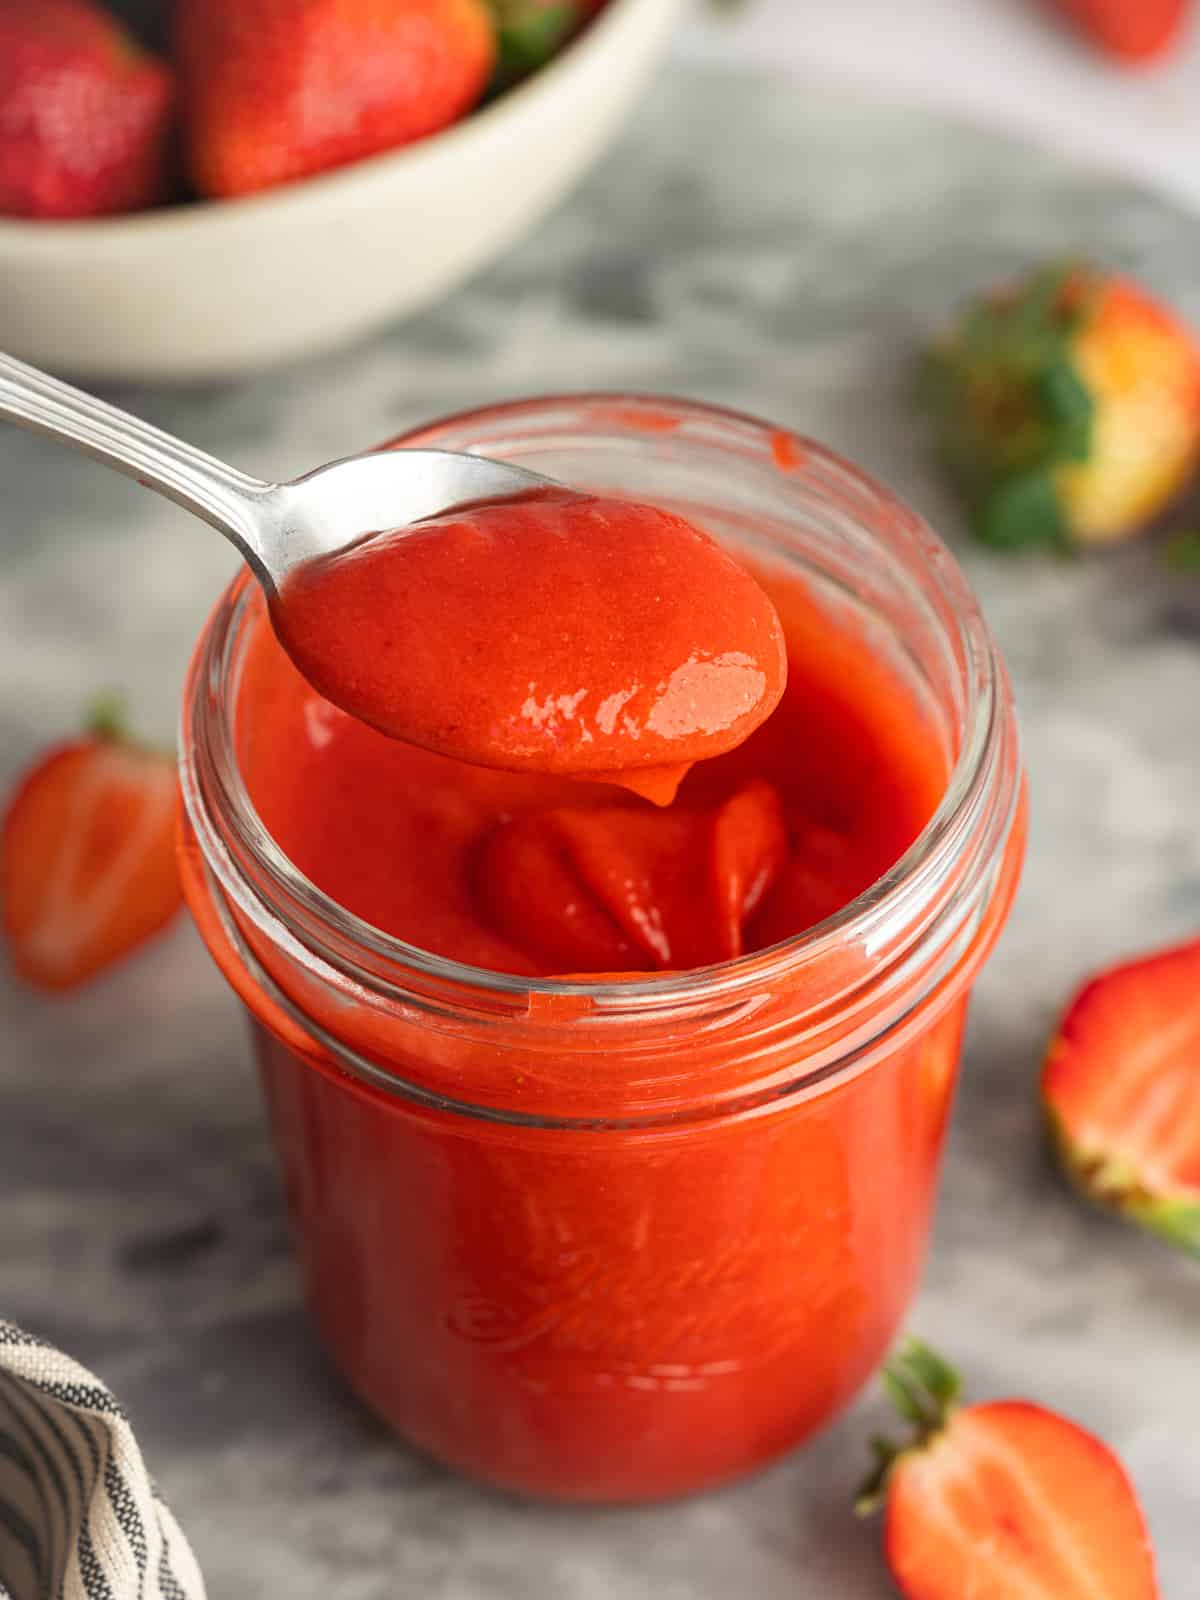 a spoon lifting out a spoonful of thick strawberry curd from a jar.